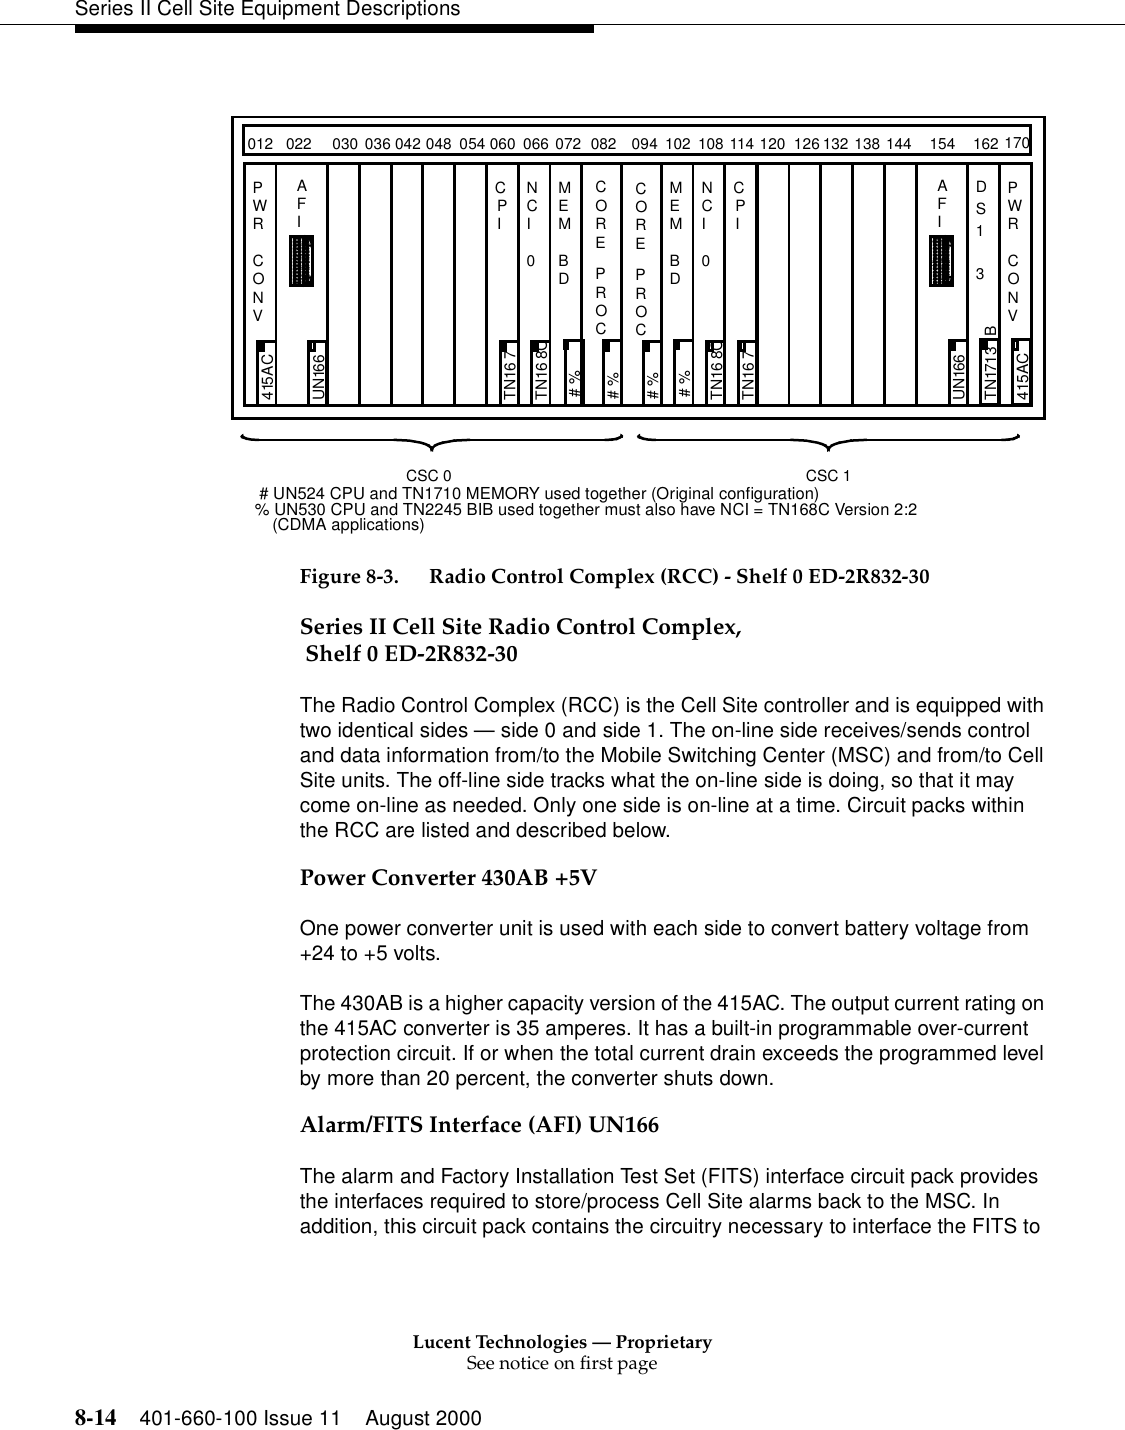 Lucent Technologies — ProprietarySee notice on first page8-14 401-660-100 Issue 11 August 2000Series II Cell Site Equipment Descriptions  Figure 8-3. Radio Control Complex (RCC) - Shelf 0 ED-2R832-30Series II Cell Site Radio Control Complex, Shelf 0 ED-2R832-30The Radio Control Complex (RCC) is the Cell Site controller and is equipped with two identical sides — side 0 and side 1. The on-line side receives/sends control and data information from/to the Mobile Switching Center (MSC) and from/to Cell Site units. The off-line side tracks what the on-line side is doing, so that it may come on-line as needed. Only one side is on-line at a time. Circuit packs within the RCC are listed and described below. Power Converter 430AB +5VOne power converter unit is used with each side to convert battery voltage from +24 to +5 volts. The 430AB is a higher capacity version of the 415AC. The output current rating on the 415AC converter is 35 amperes. It has a built-in programmable over-current protection circuit. If or when the total current drain exceeds the programmed level by more than 20 percent, the converter shuts down. Alarm/FITS Interface (AFI) UN166The alarm and Factory Installation Test Set (FITS) interface circuit pack provides the interfaces required to store/process Cell Site alarms back to the MSC. In addition, this circuit pack contains the circuitry necessary to interface the FITS to PWRCONV415ACCTN16 7PICTN16 7PINTN16 8CCI0NTN16 8CCI0MEMBDMEMBDCCSC 0 CSC 1#%OREPROCC#%OREPROCAFIUN166AFIUN166012 022 030 036 042 048 054 060 066 072 082 094 102 108 114 120 126 132 138 144 154 162PWRCONV170415AC#%#%DS13TN1713 B# UN524 CPU and TN1710 MEMORY used together (Original configuration)% UN530 CPU and TN2245 BIB used together must also have NCI = TN168C Version 2:2(CDMA applications)